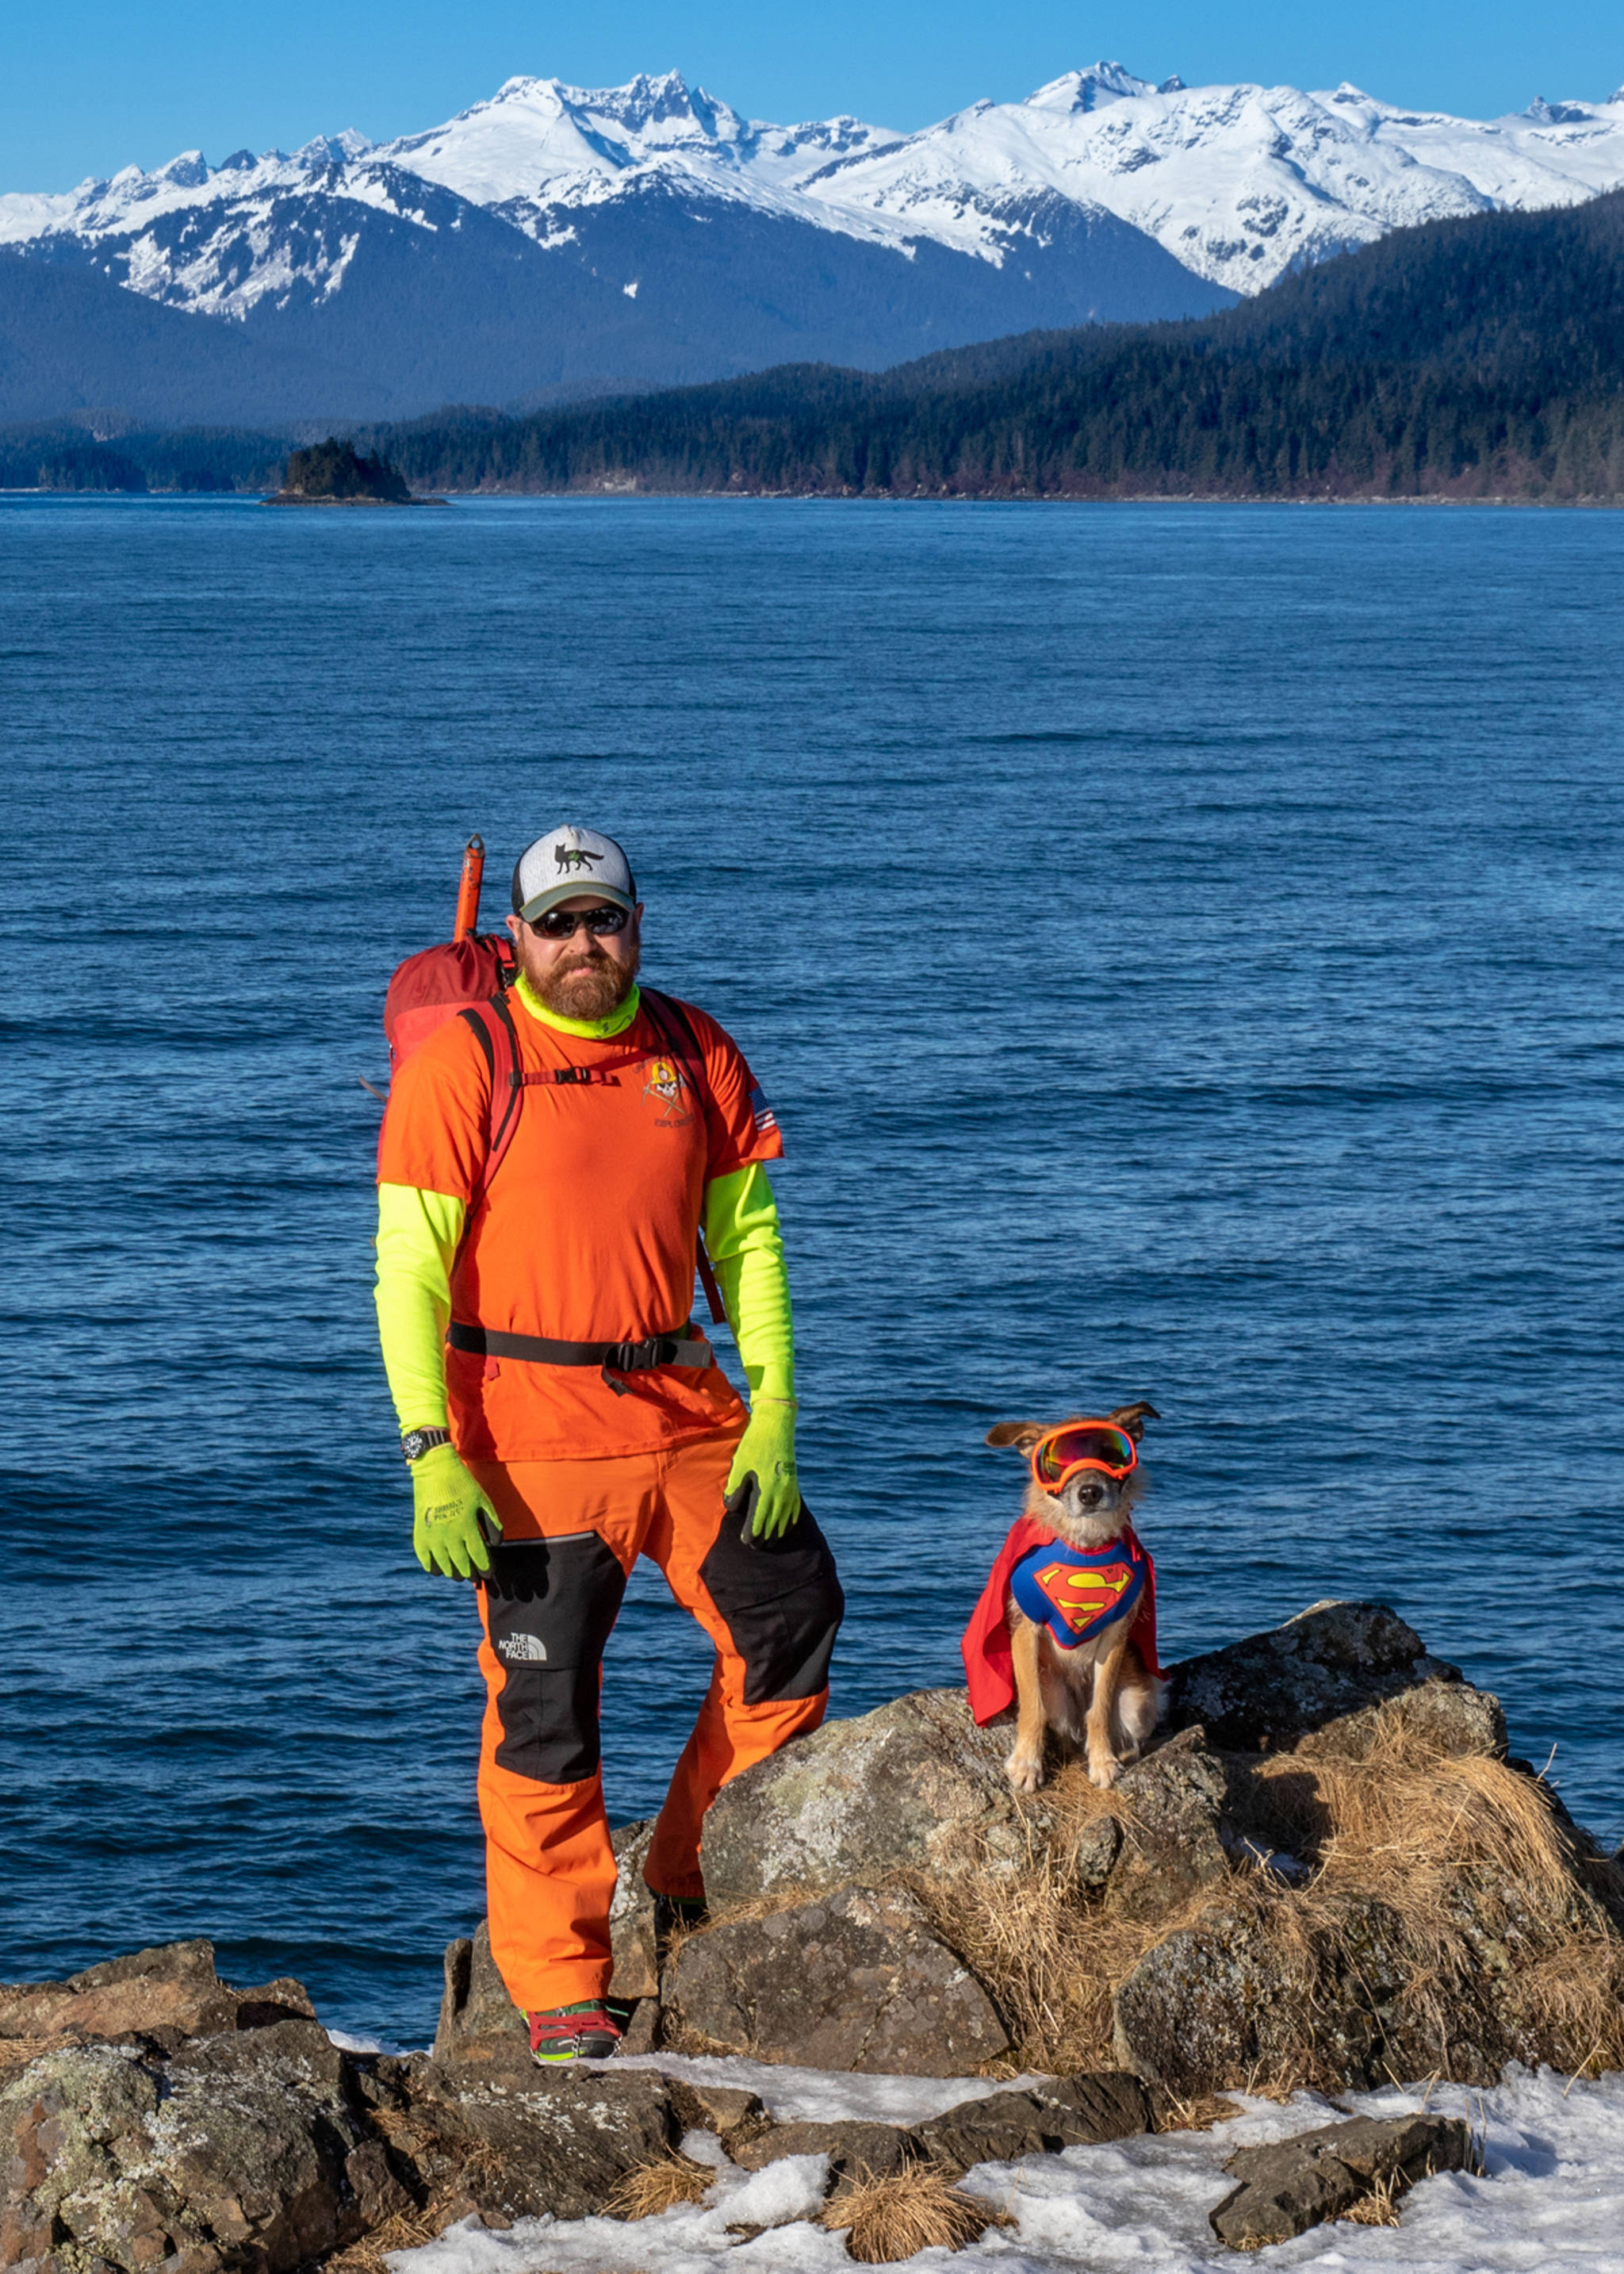 March 17, 2019: Brian Weed, a seasoned outdoor adventurer and founding member of Juneau’s Hidden History group, is a colorful character! He knows that bright colors are an important safety consideration when out exploring remote areas around Juneau. Brian wears orange North Face softshell pants, chartreuse Carhartt long-sleeve shirt, orange Underground Explorer T-shirt, red Arc’Teryx backpack, Sly Fox hat, Lowa boots, Kahtoola microspikes and climbing gear. Kat — his dog — wears her equally colorful Super Girl cape and Rex Specs polarized dog goggles.